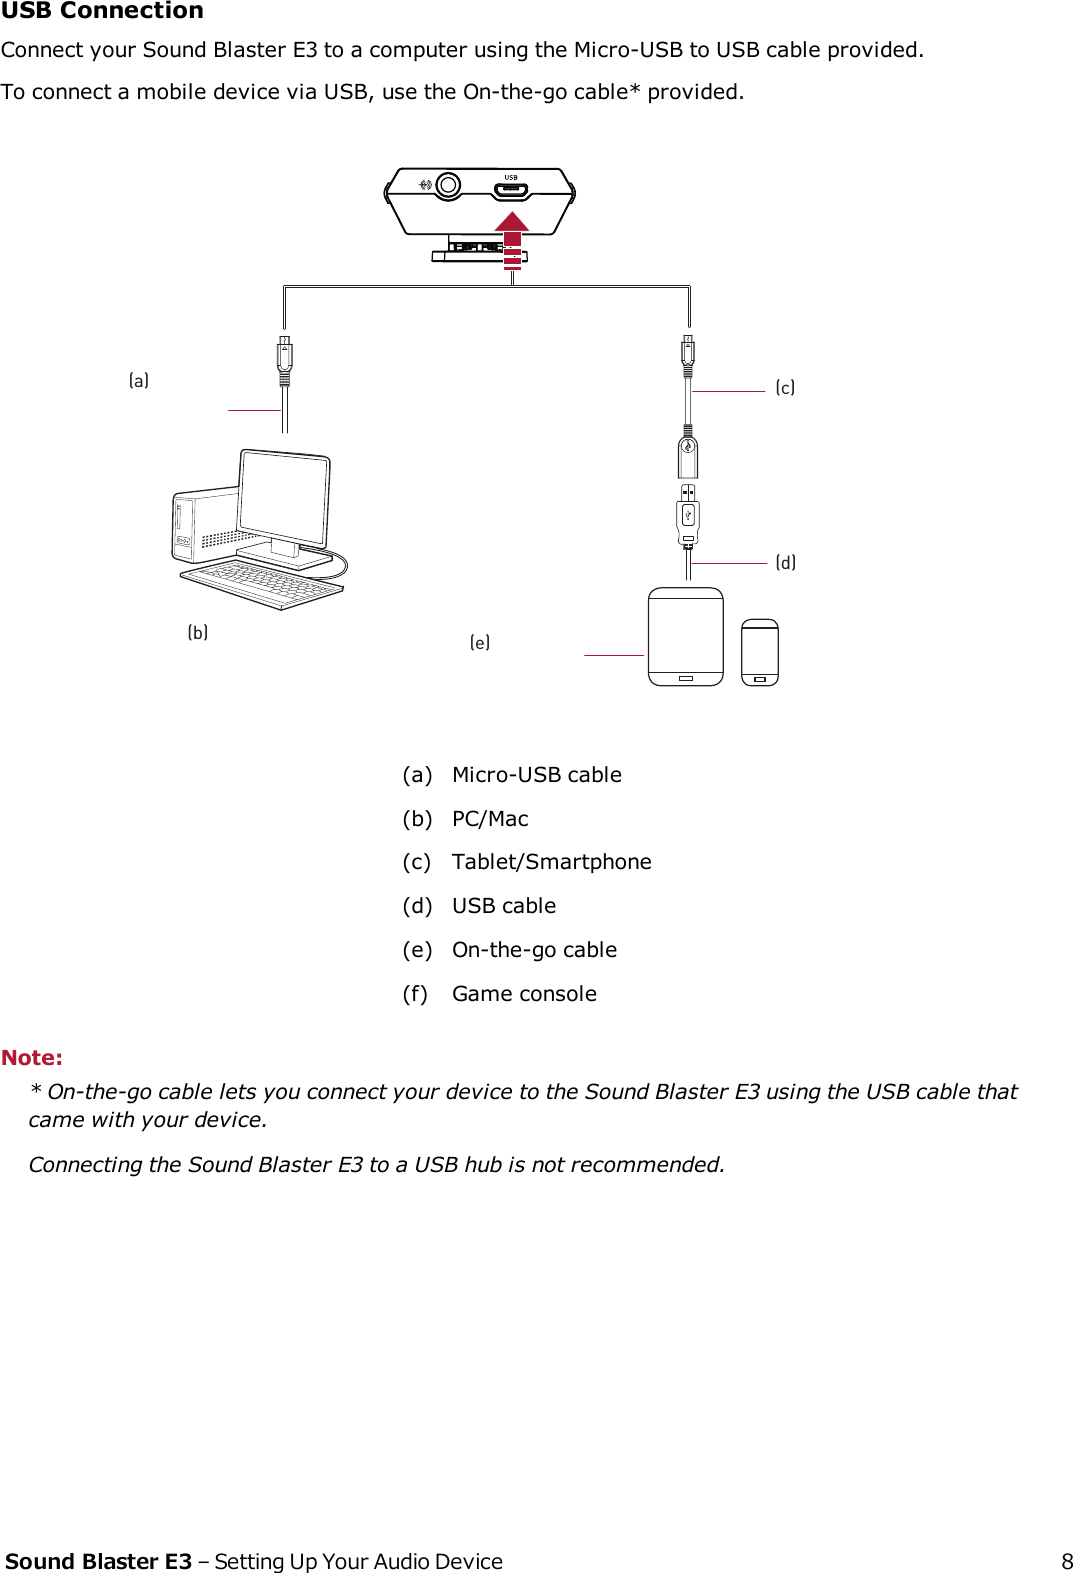 USB ConnectionConnect your Sound Blaster E3 to a computer using the Micro-USB to USB cable provided.To connect a mobile device via USB, use the On-the-go cable* provided.(c)(d)(a) (e)(b)(a) Micro-USB cable(b) PC/Mac(c) Tablet/Smartphone(d) USB cable(e) On-the-go cable(f) Game consoleNote:* On-the-go cable lets you connect your device to the Sound Blaster E3 using the USB cable thatcame with your device.Connecting the Sound Blaster E3 to a USB hub is not recommended.Sound Blaster E3 – Setting Up Your Audio Device 8